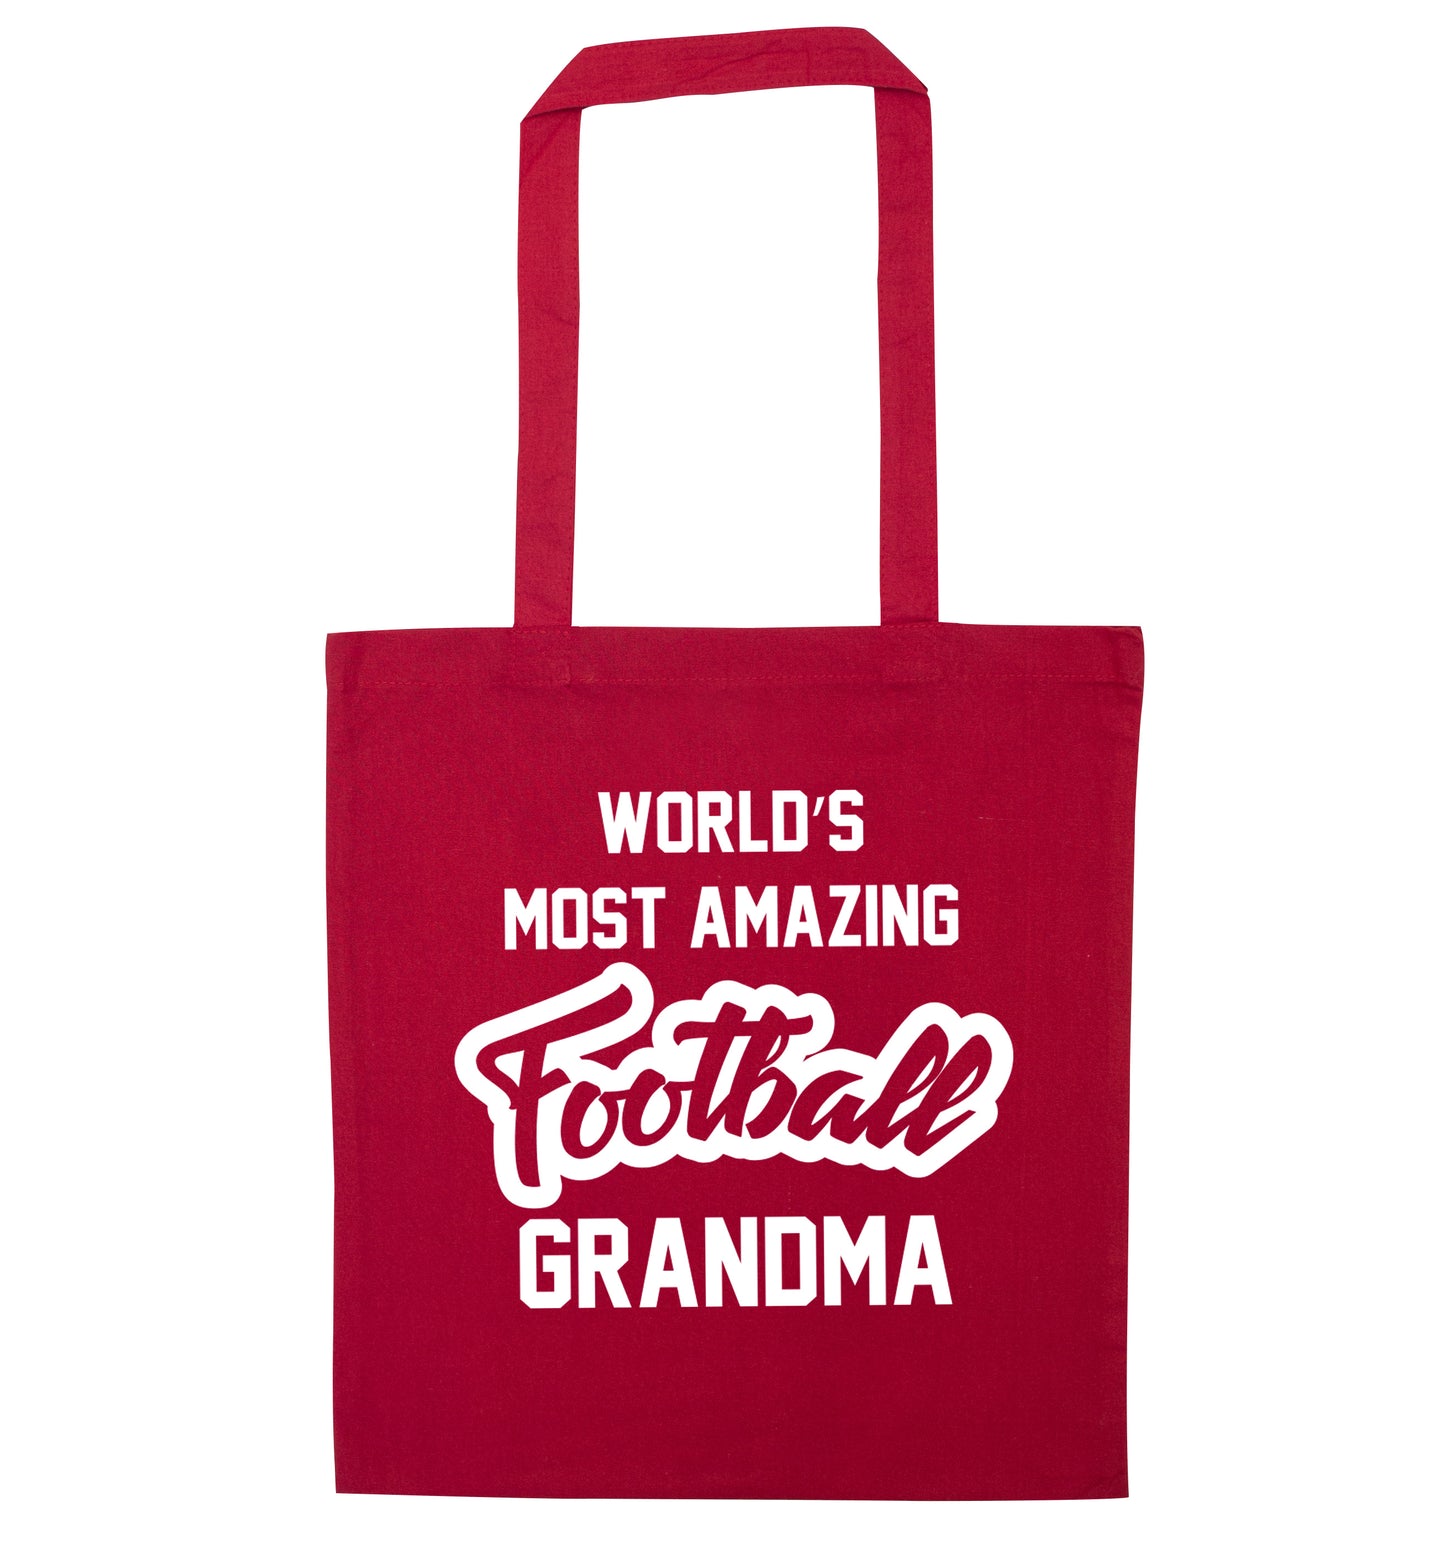 Worlds most amazing football grandma red tote bag